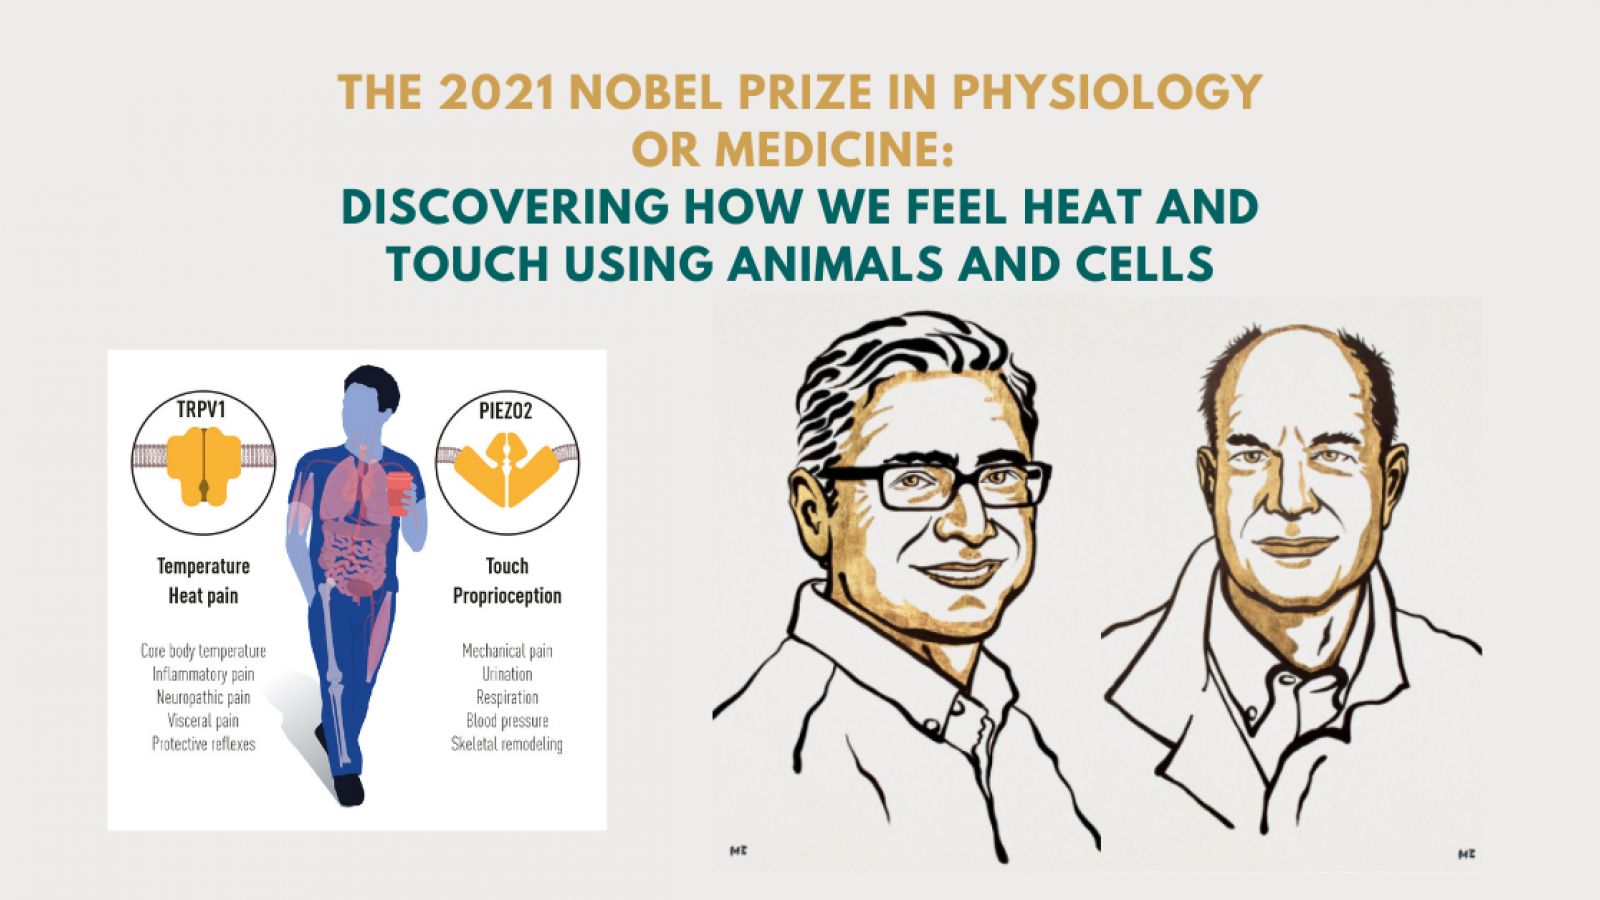 2021 Nobel Prize in Physiology or Medicine: Discovering how we feel heat and touch